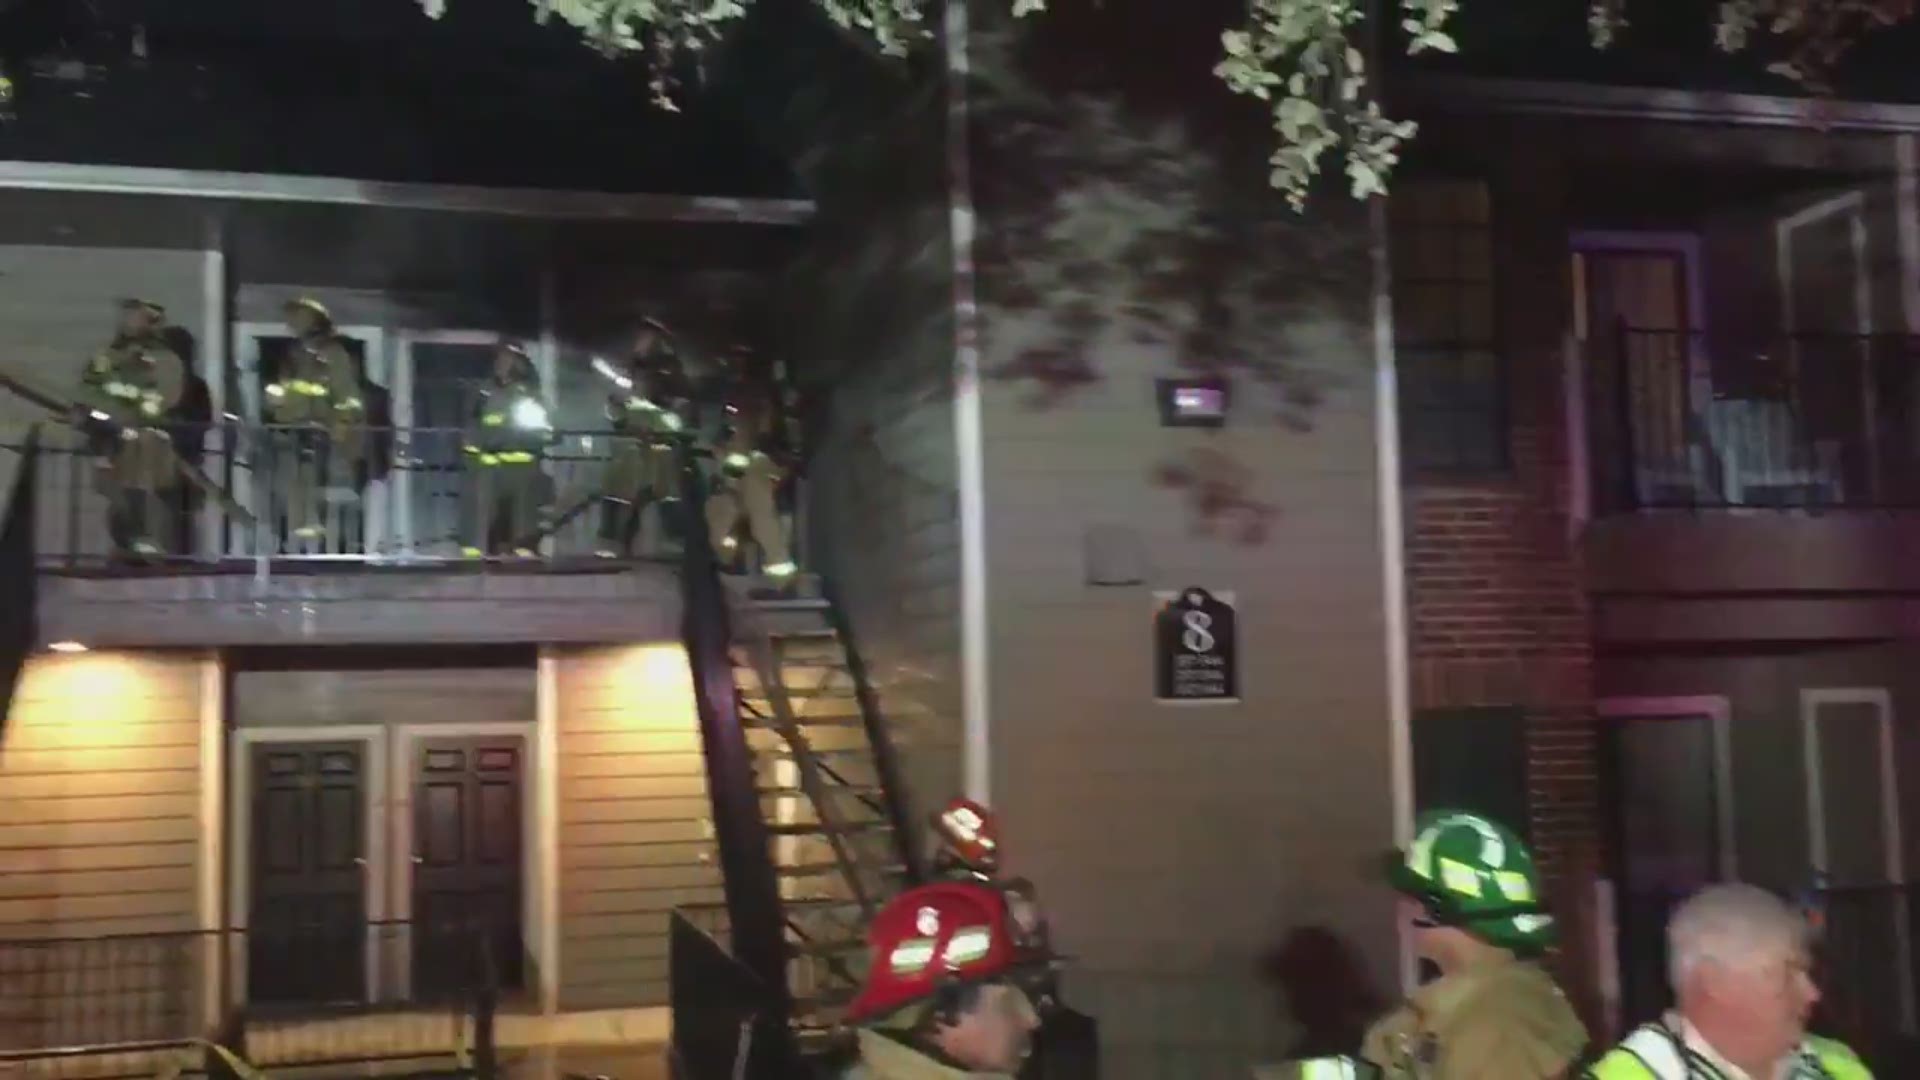 Ten people were displaced Tuesday night after a fire at the High Oaks apartments in Northwest Austin.